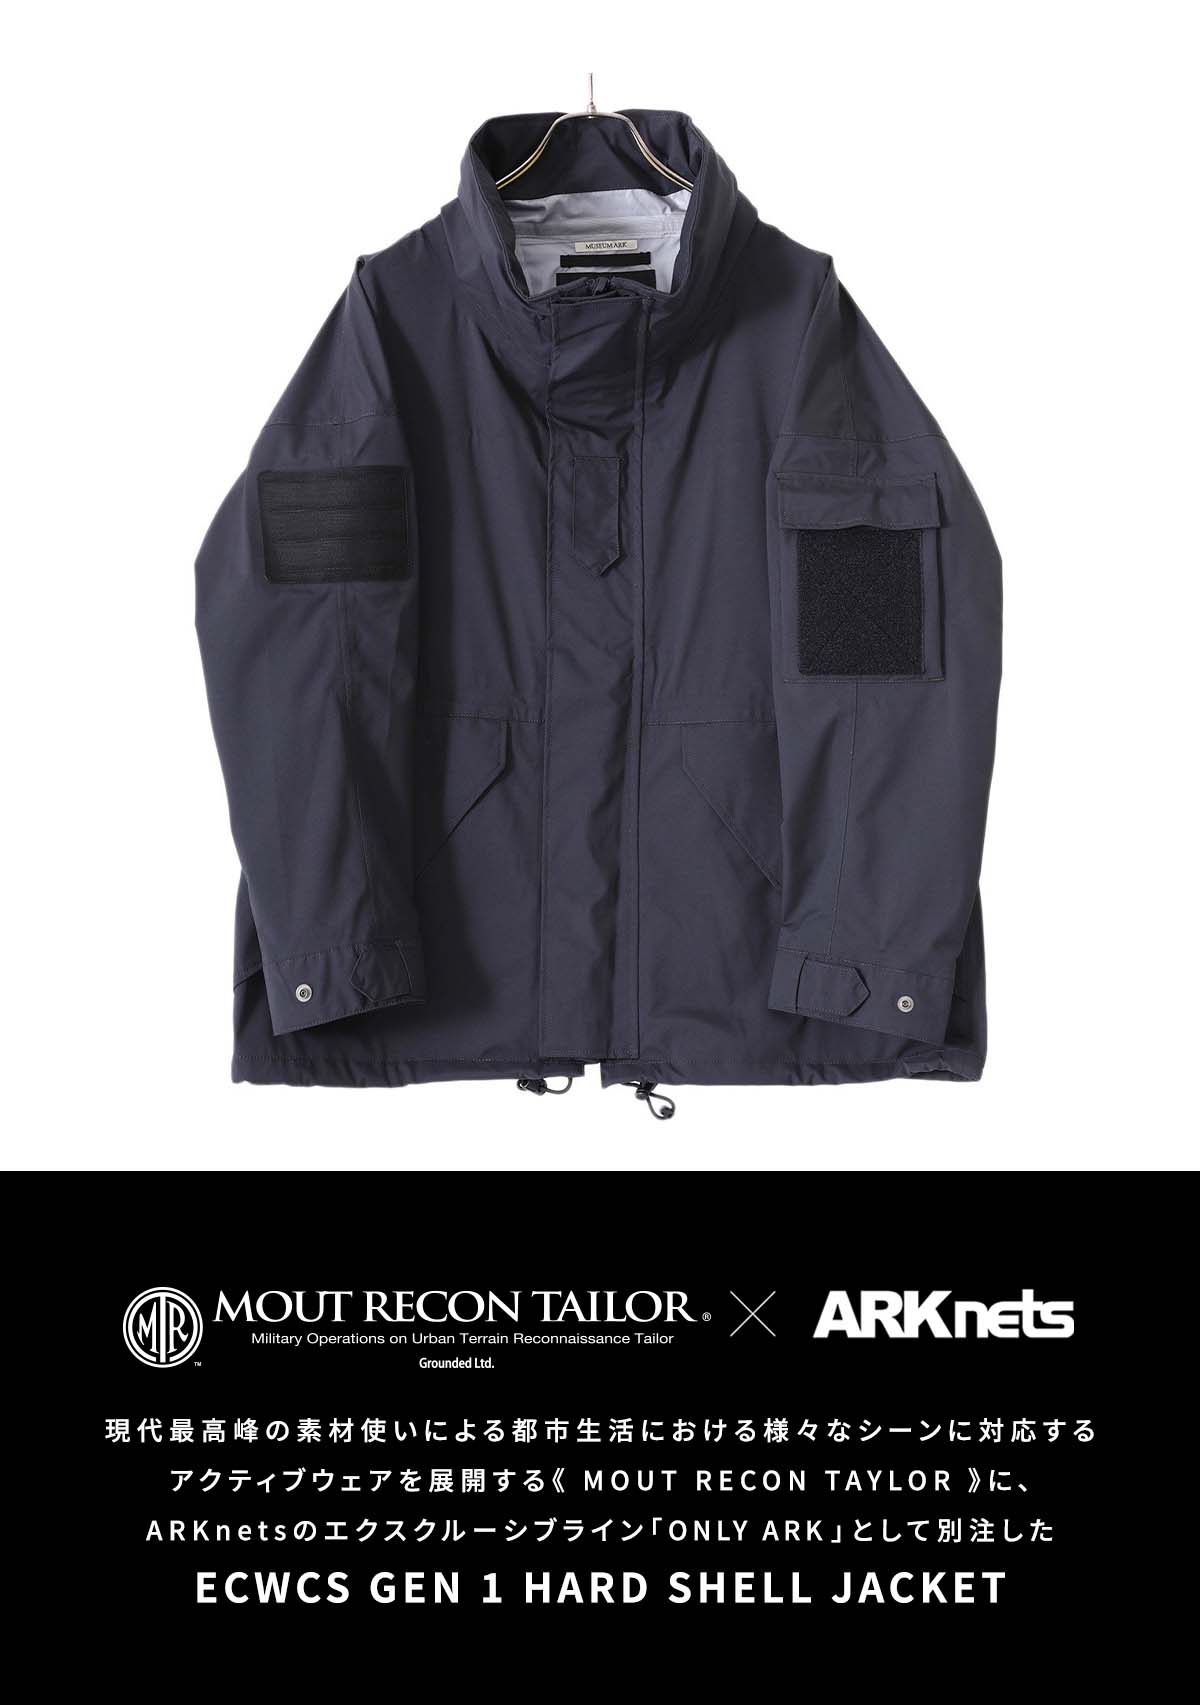 【P5倍】MOUT RECON TAILOR / マウトリーコンテーラー ： 【ONLY ARK】別注 ECWCS GEN1 HARD SHELL  JACKET ： ONLYARK-0-1025